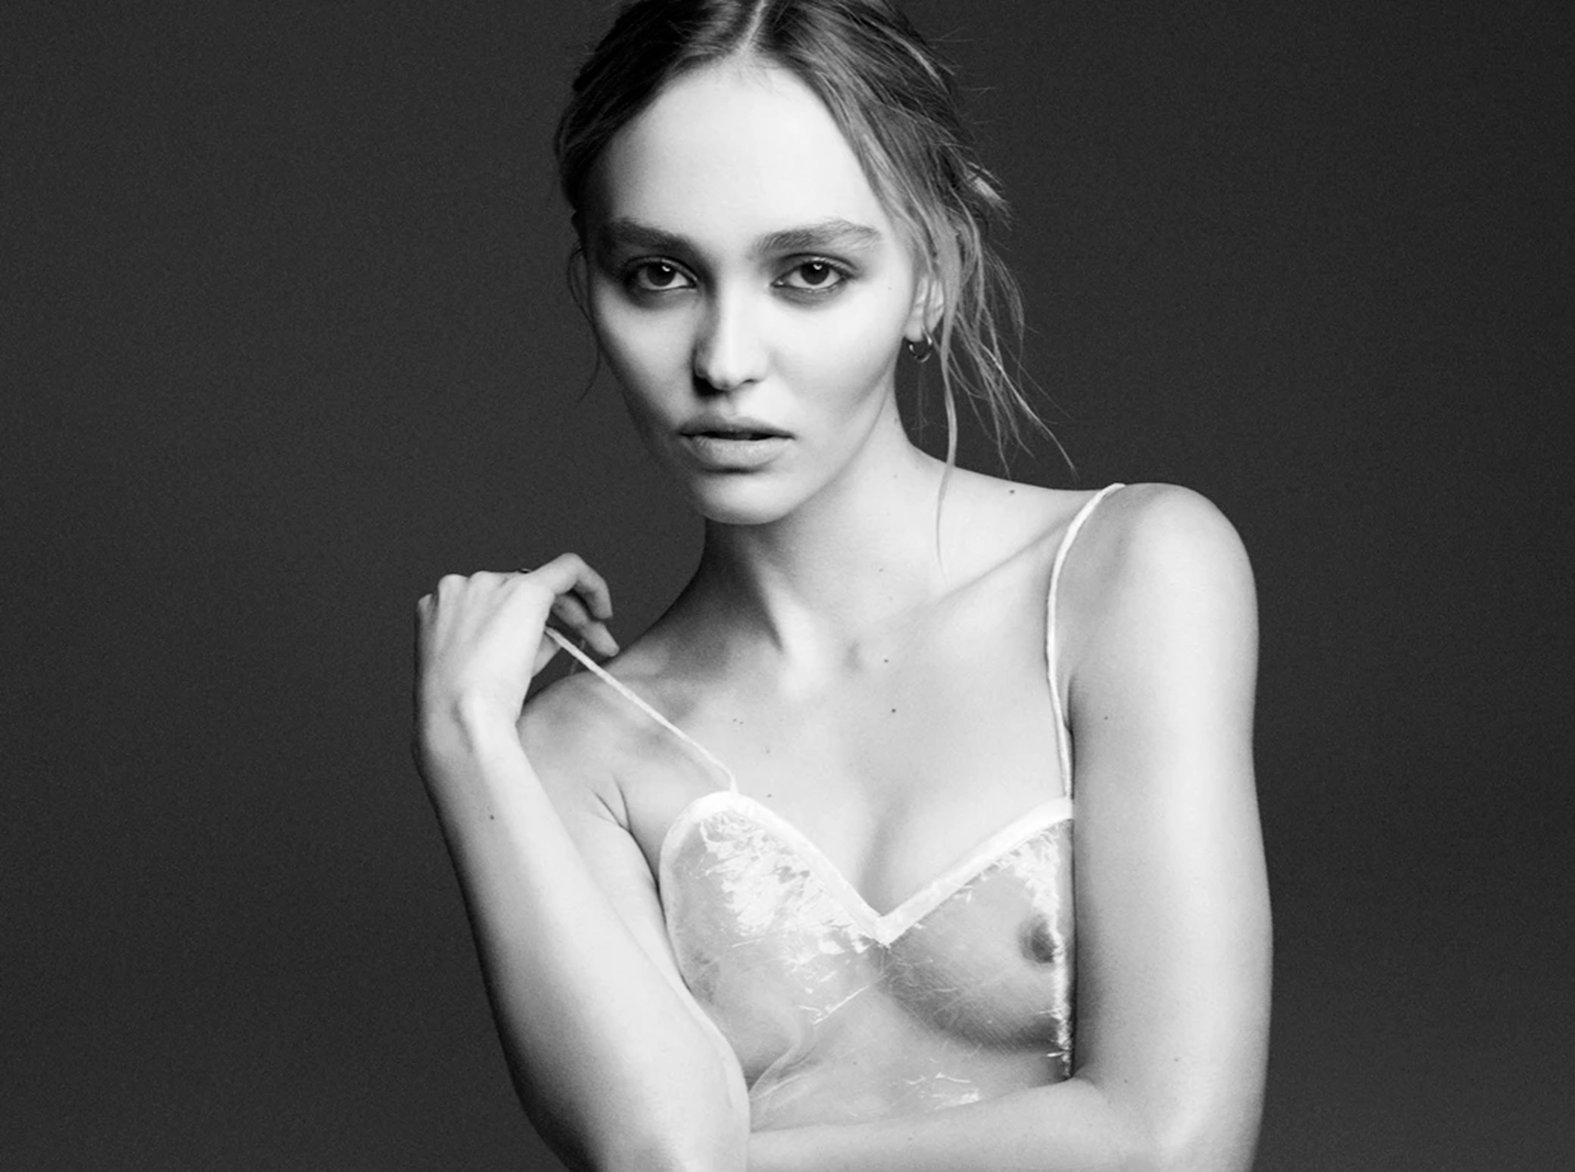 Lily-rose depp poses topless